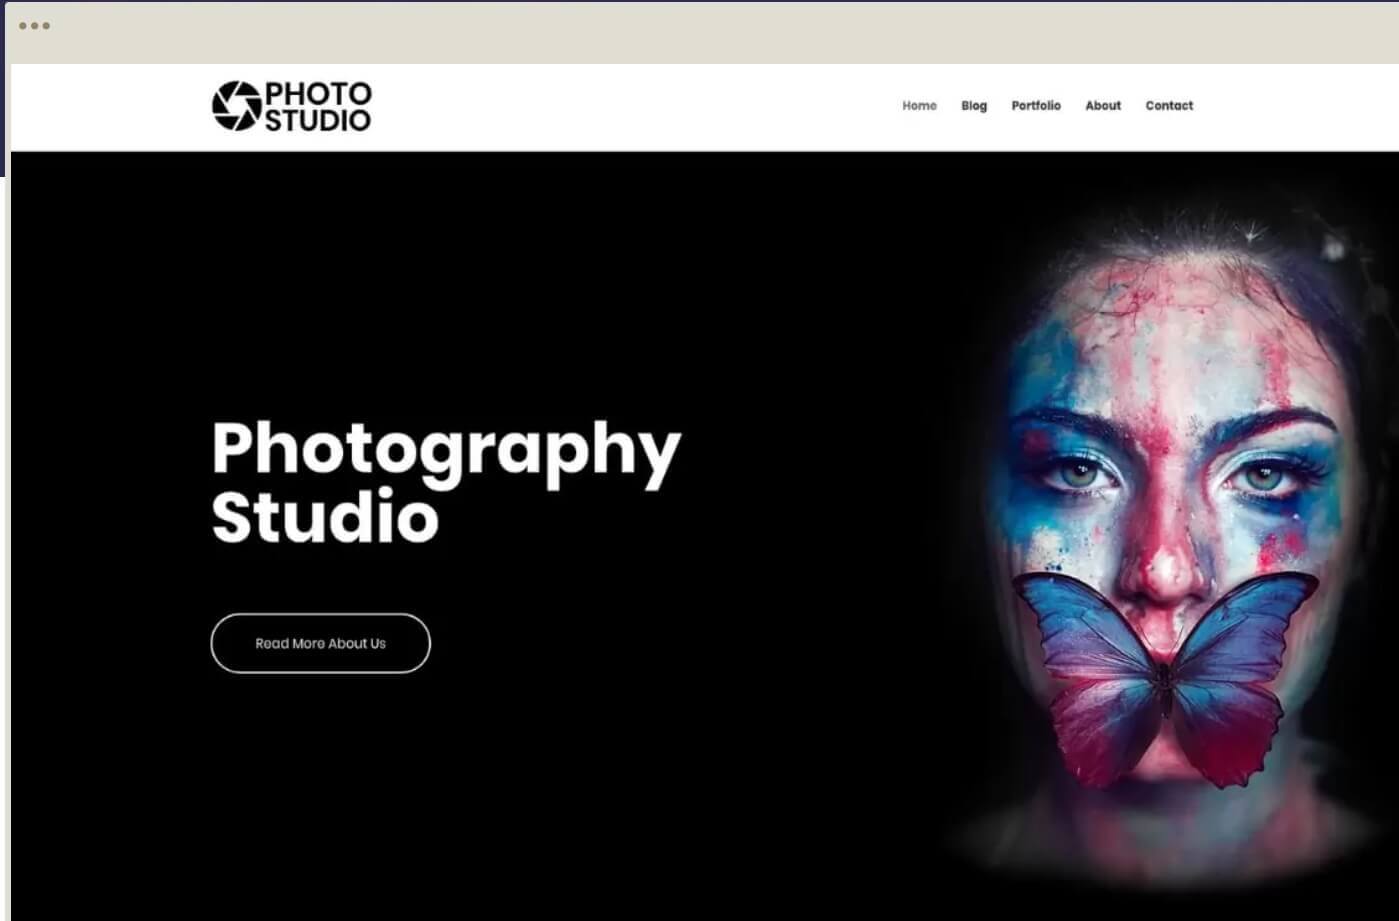 responsive theme for photography websites